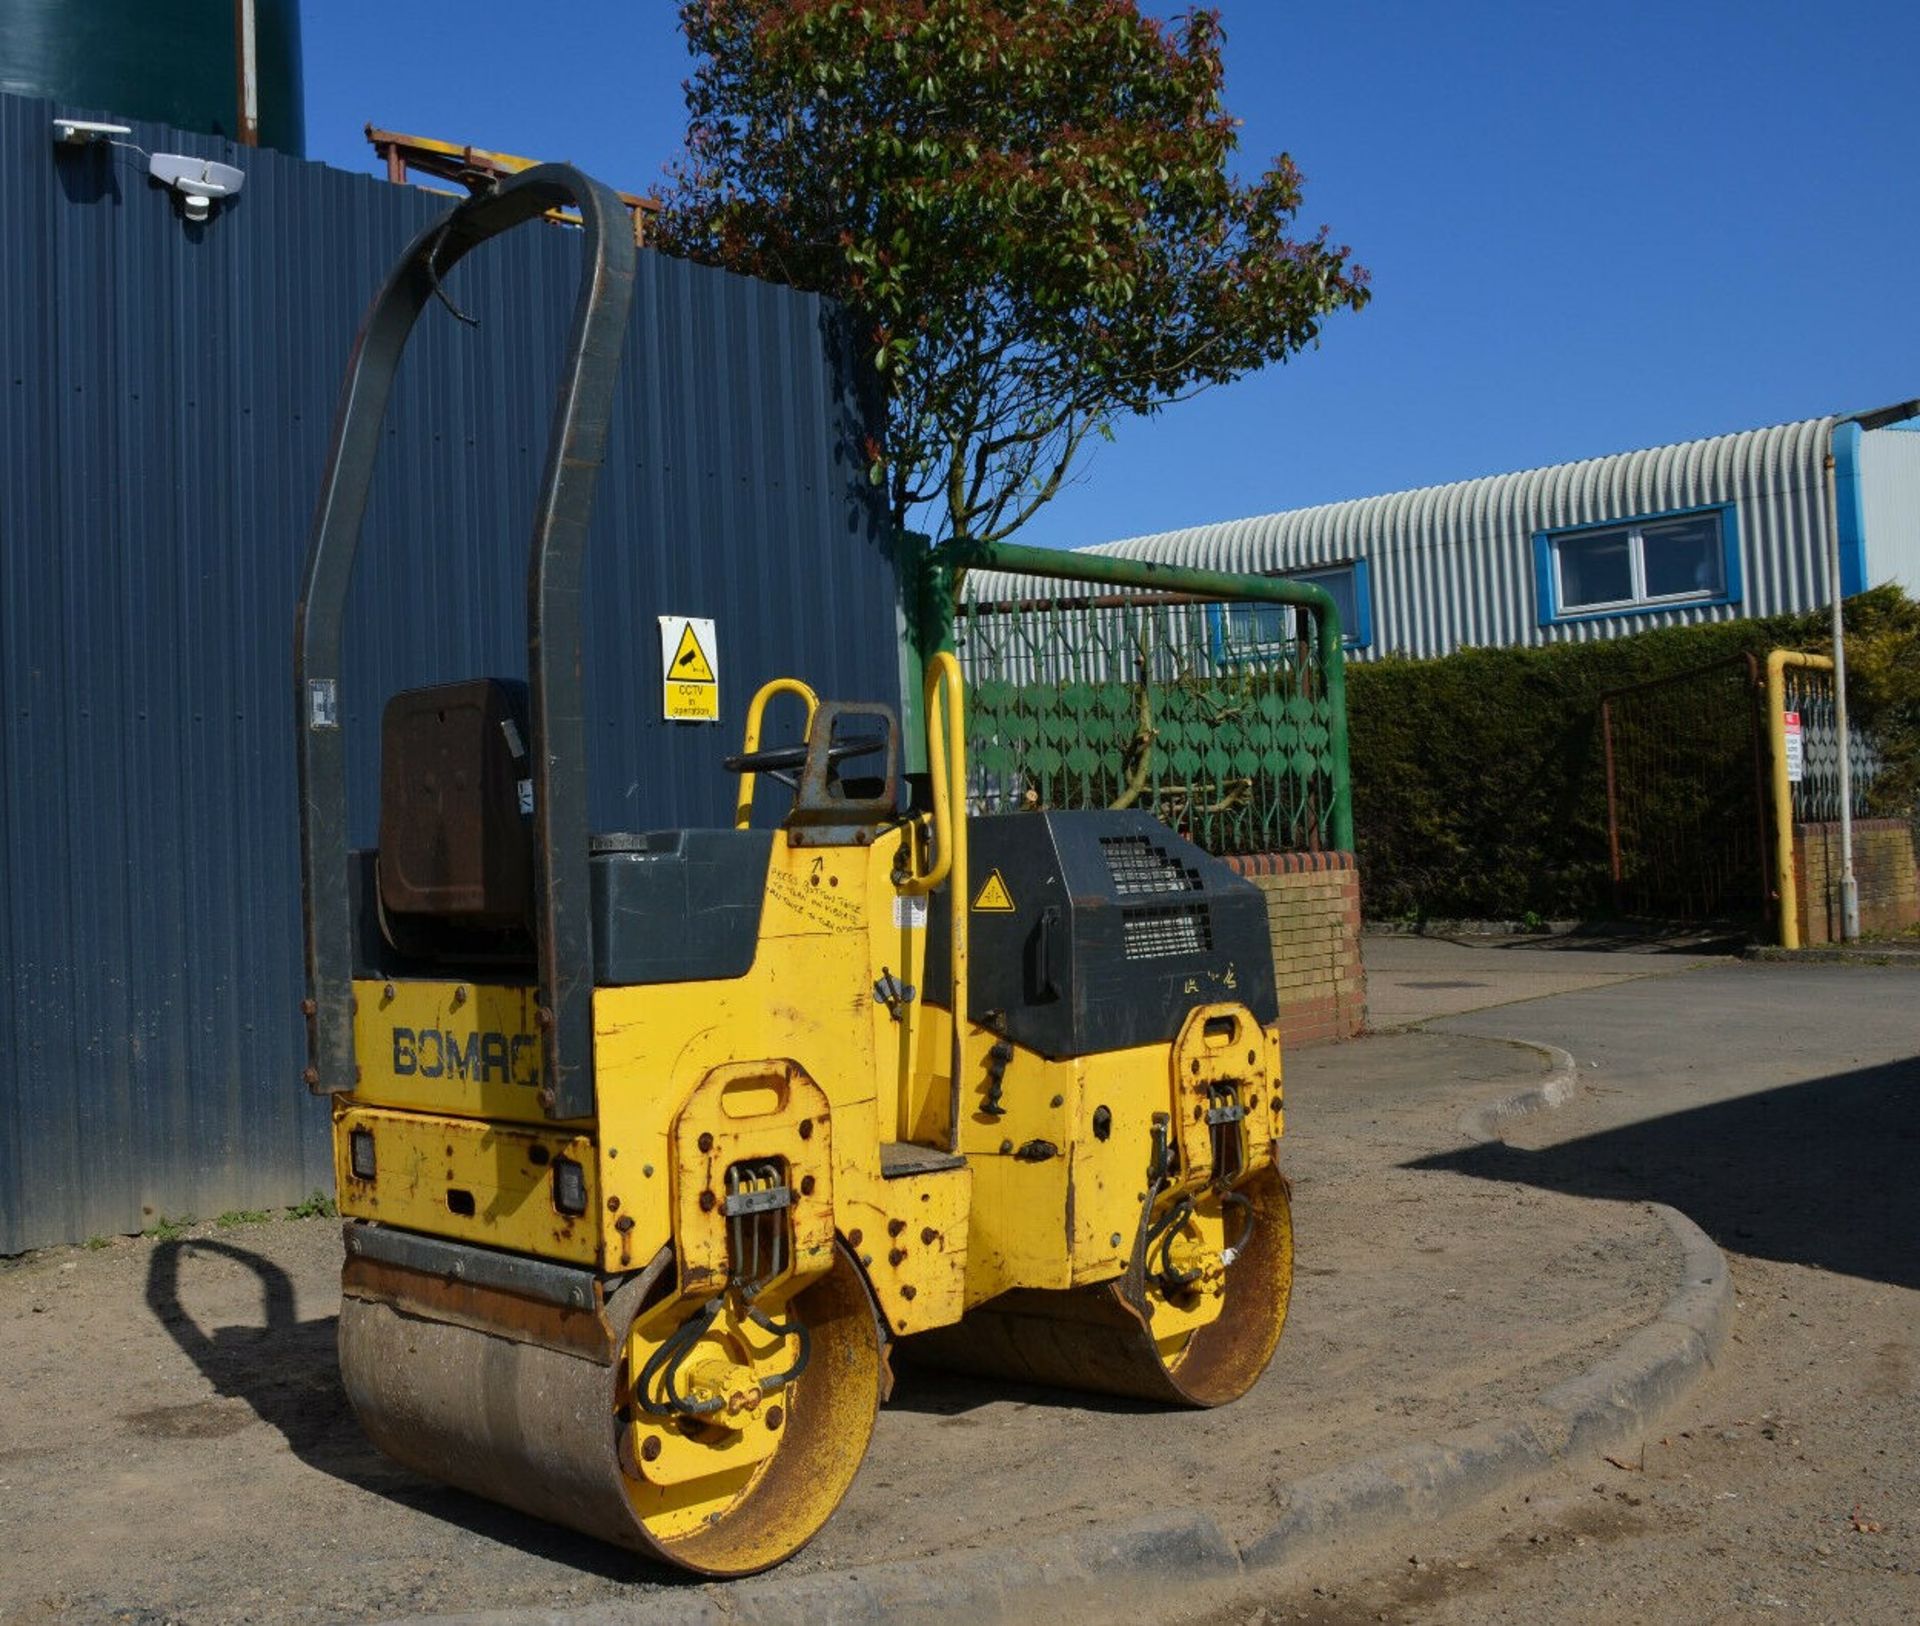 Bomag Bw 80 Ad-2 Roller 2006 - Image 3 of 11